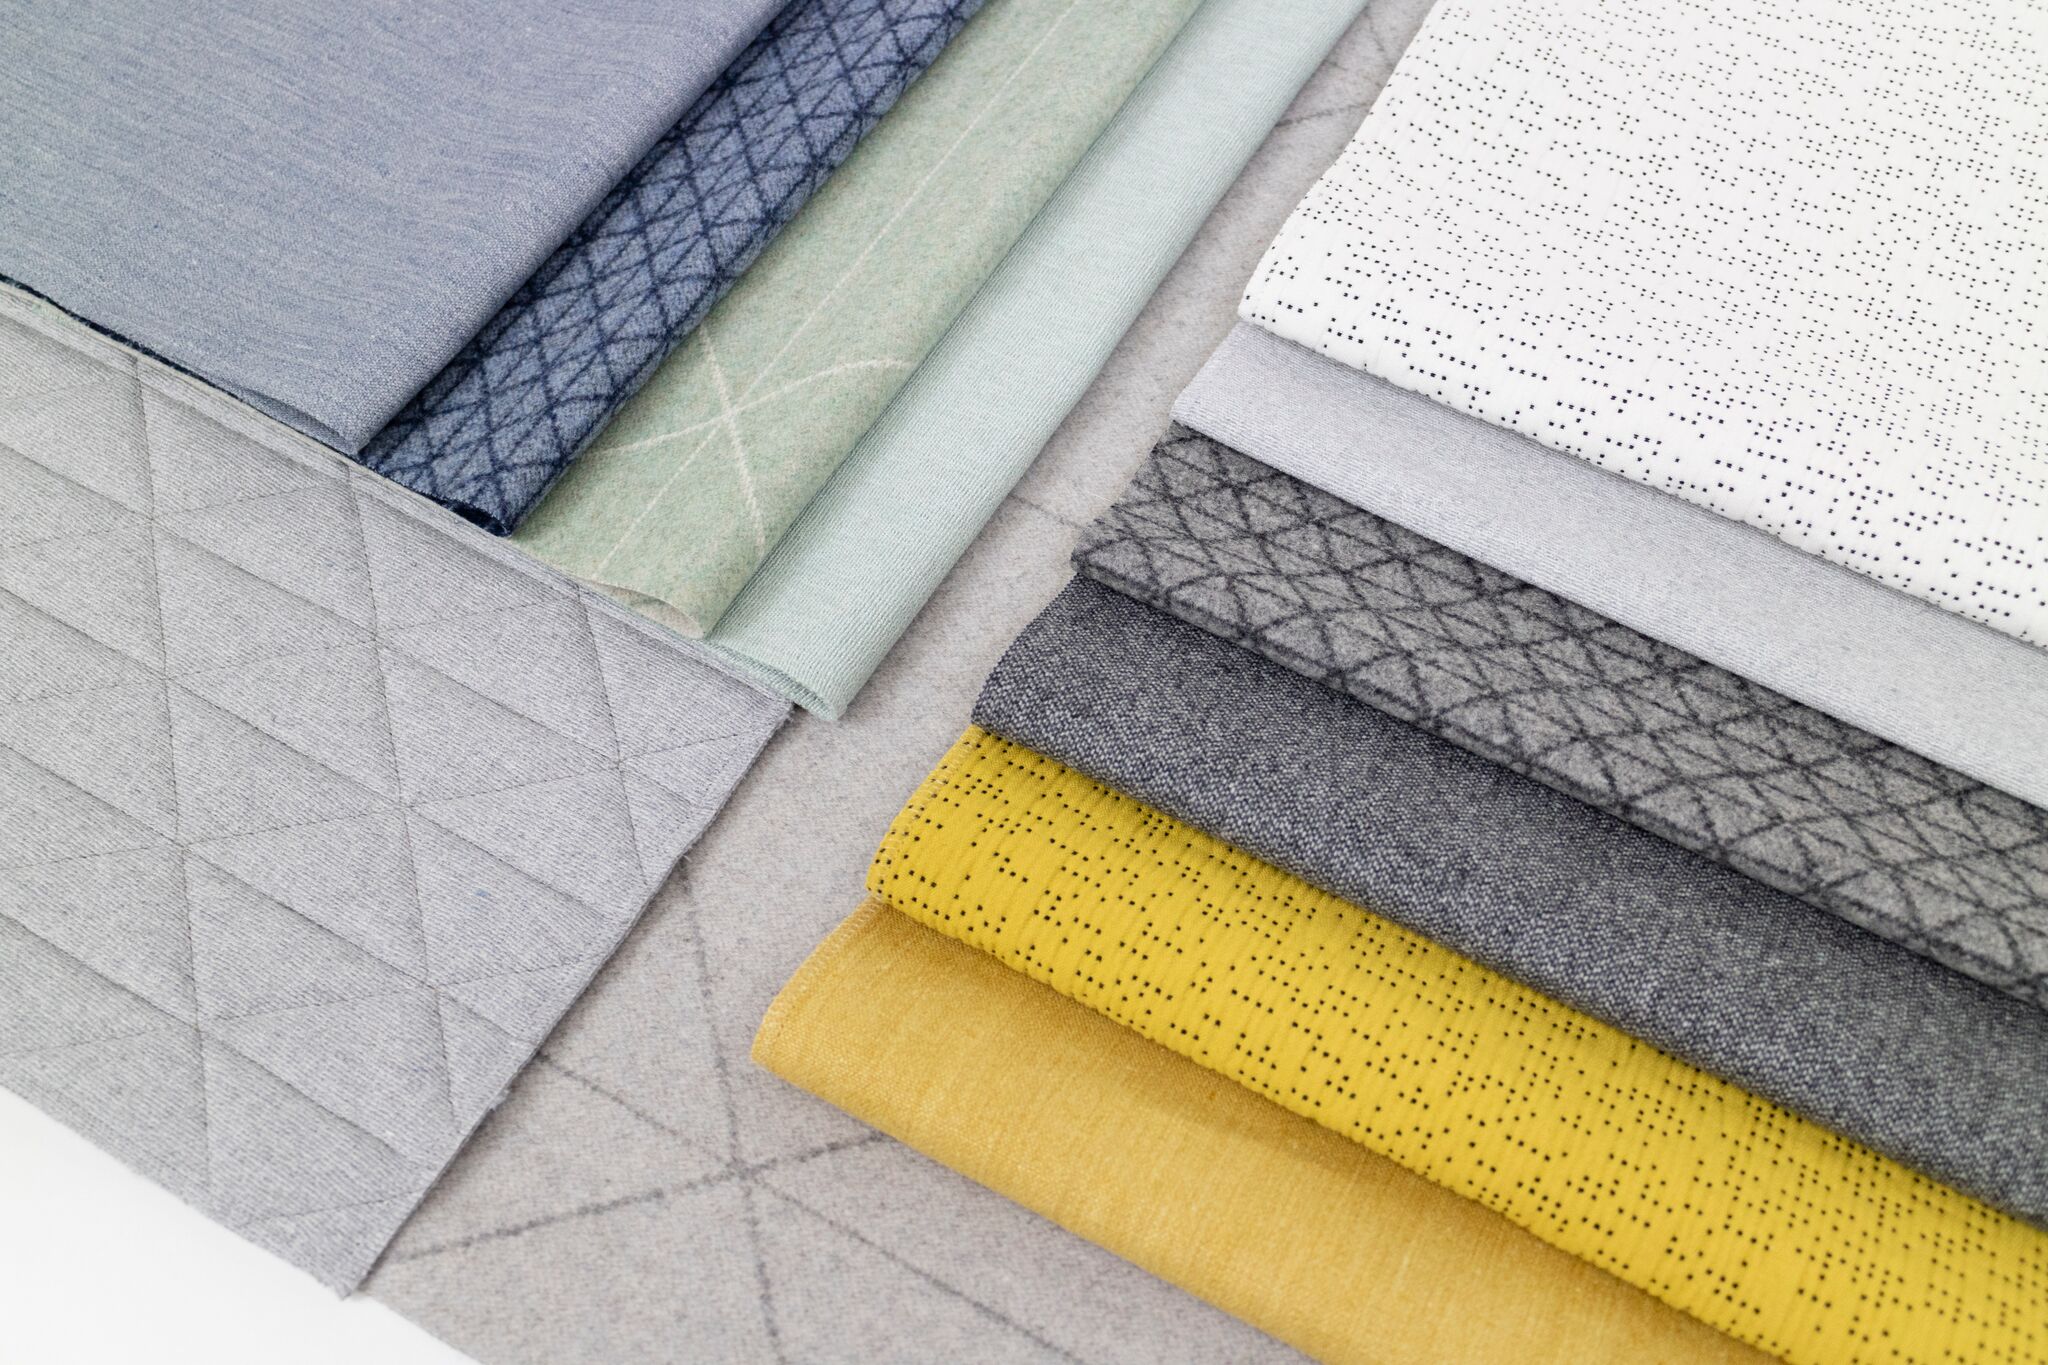 Designtex and Coalesse new textile collection sample patterns